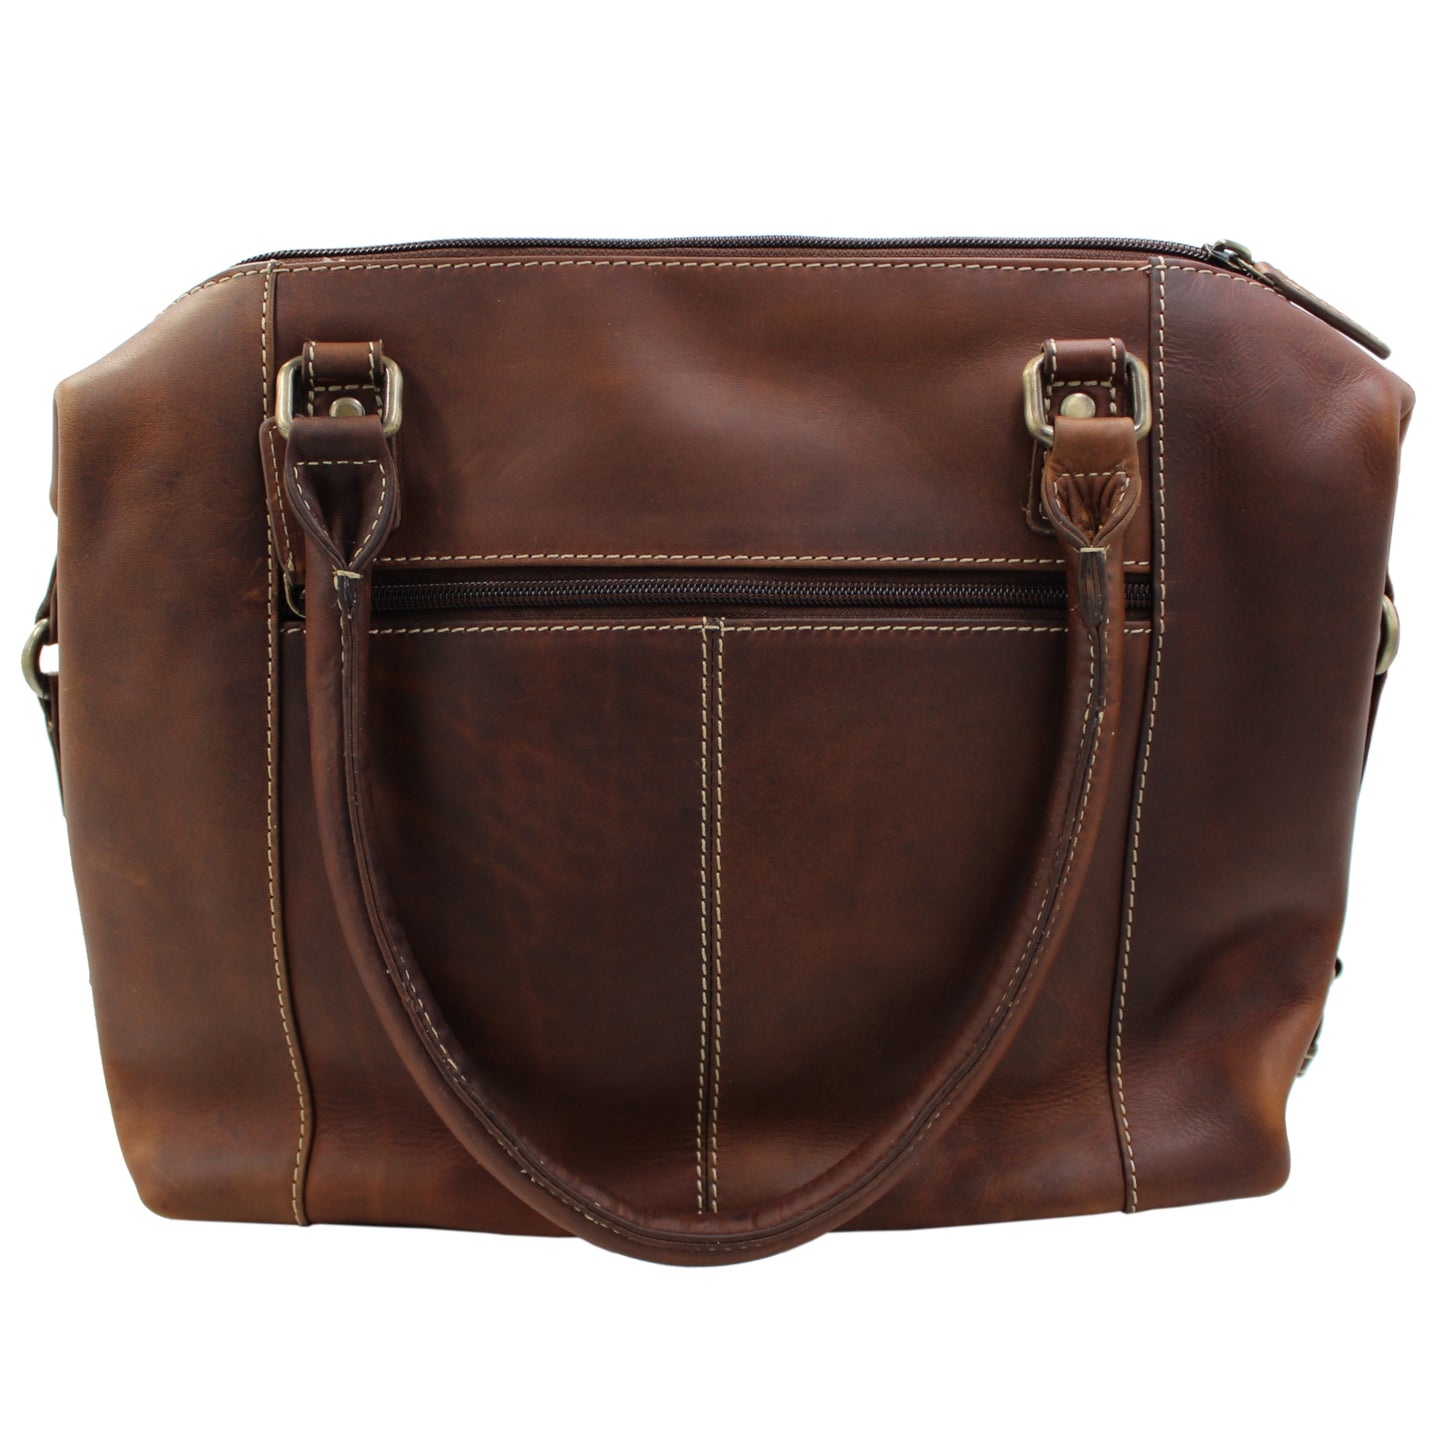 RE Leather Bag (13"x 10"x 3")